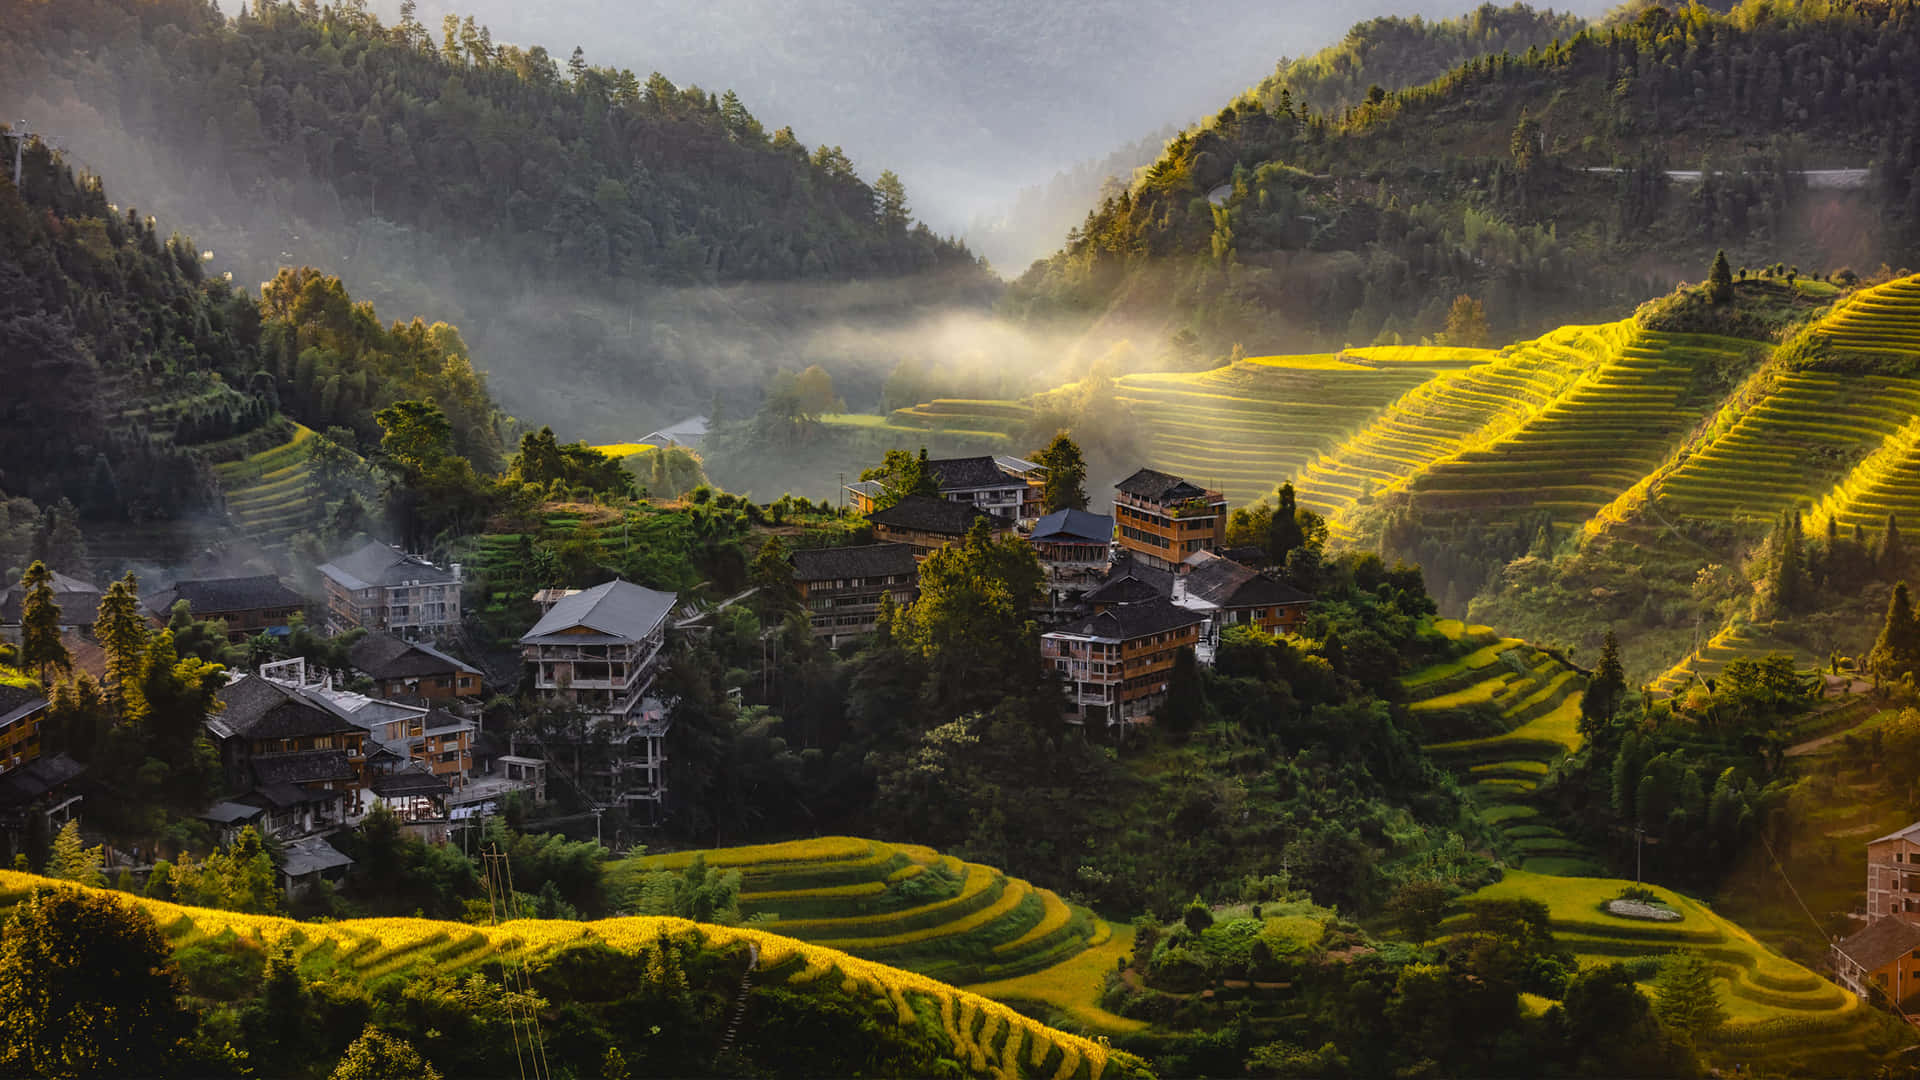 A Village With Rice Terraces In The Mountains